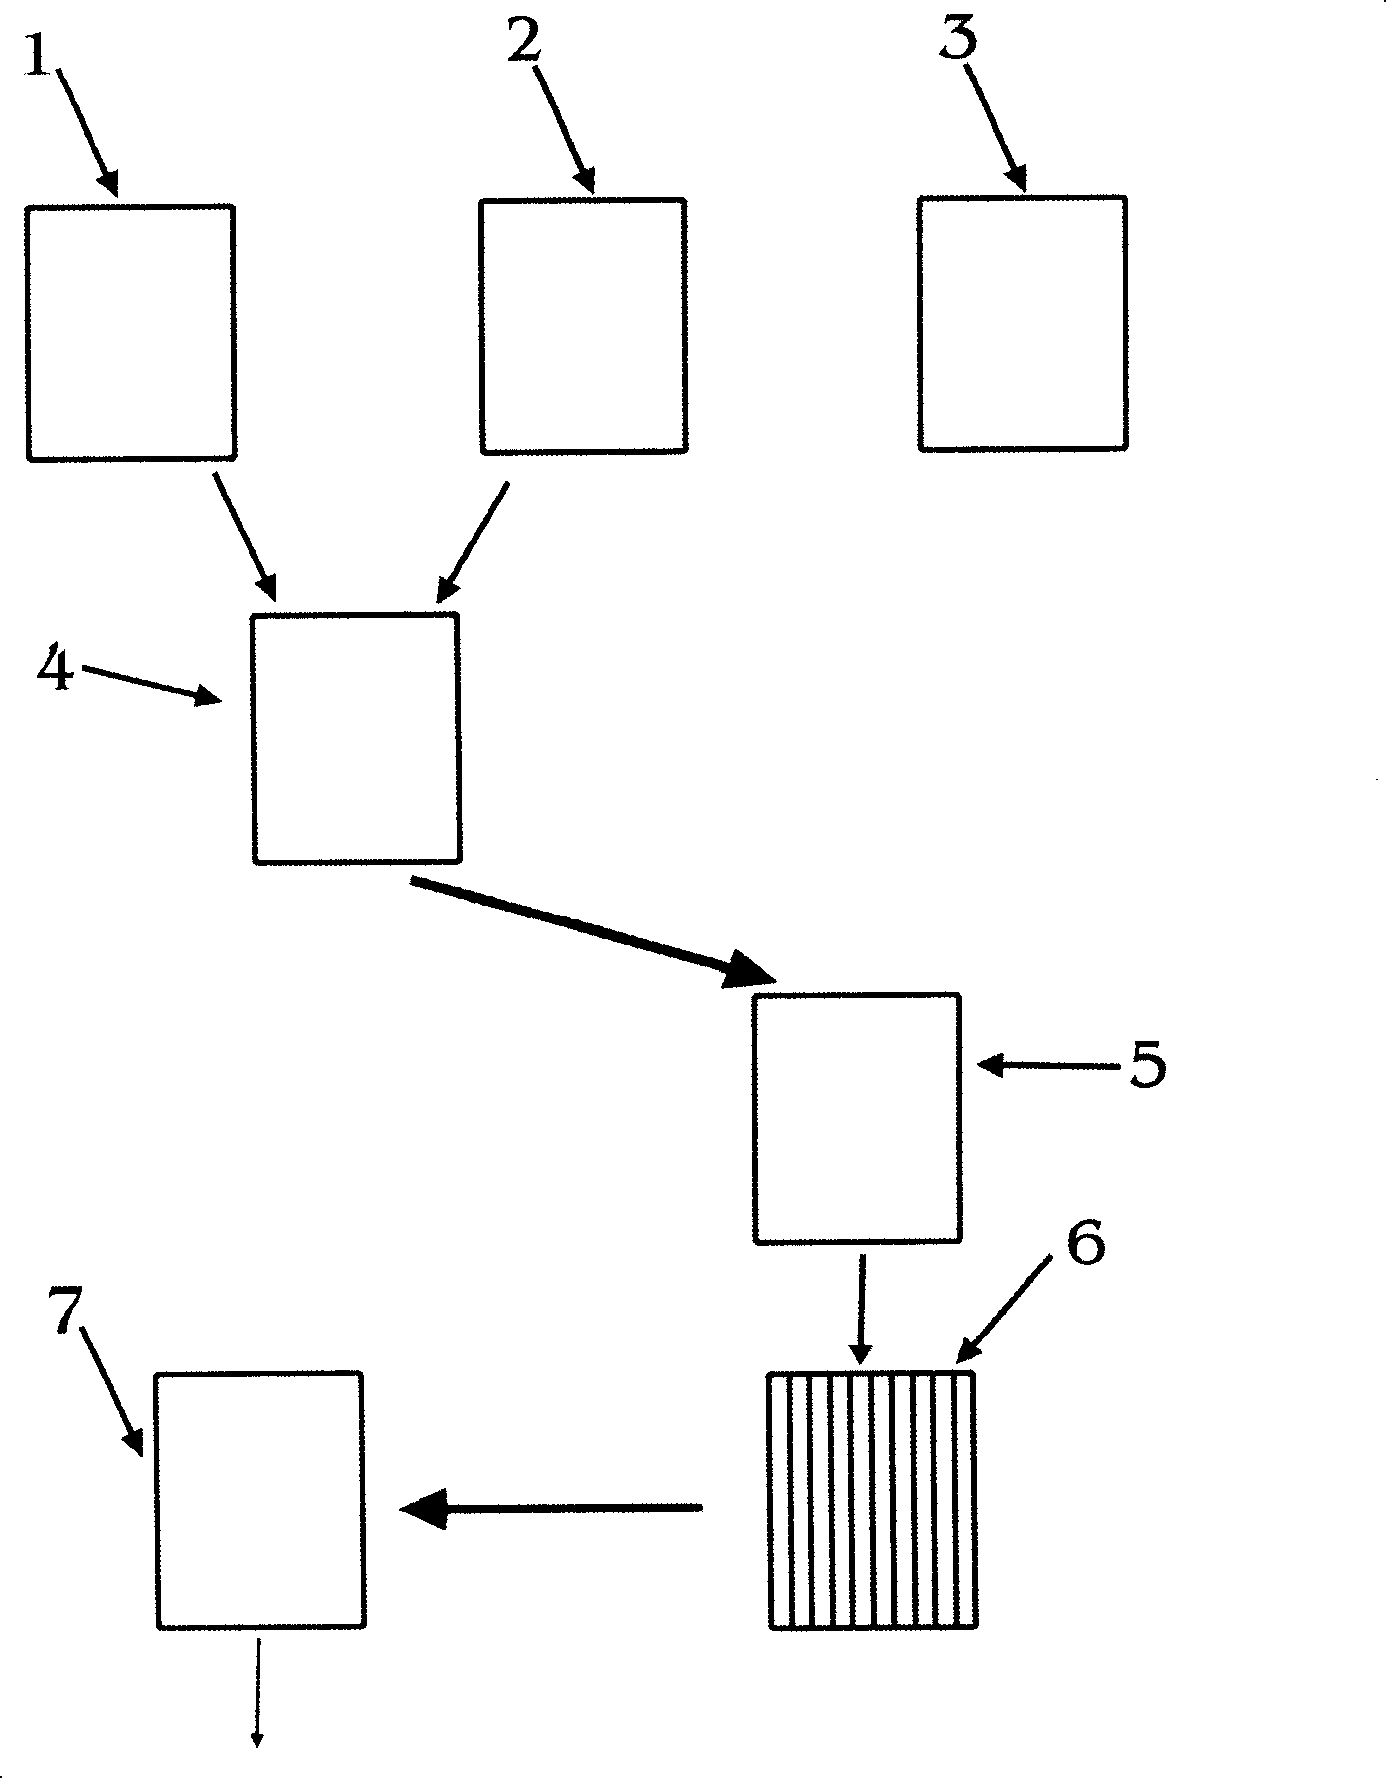 Process for producing cupric hydroxide or cupric oxide